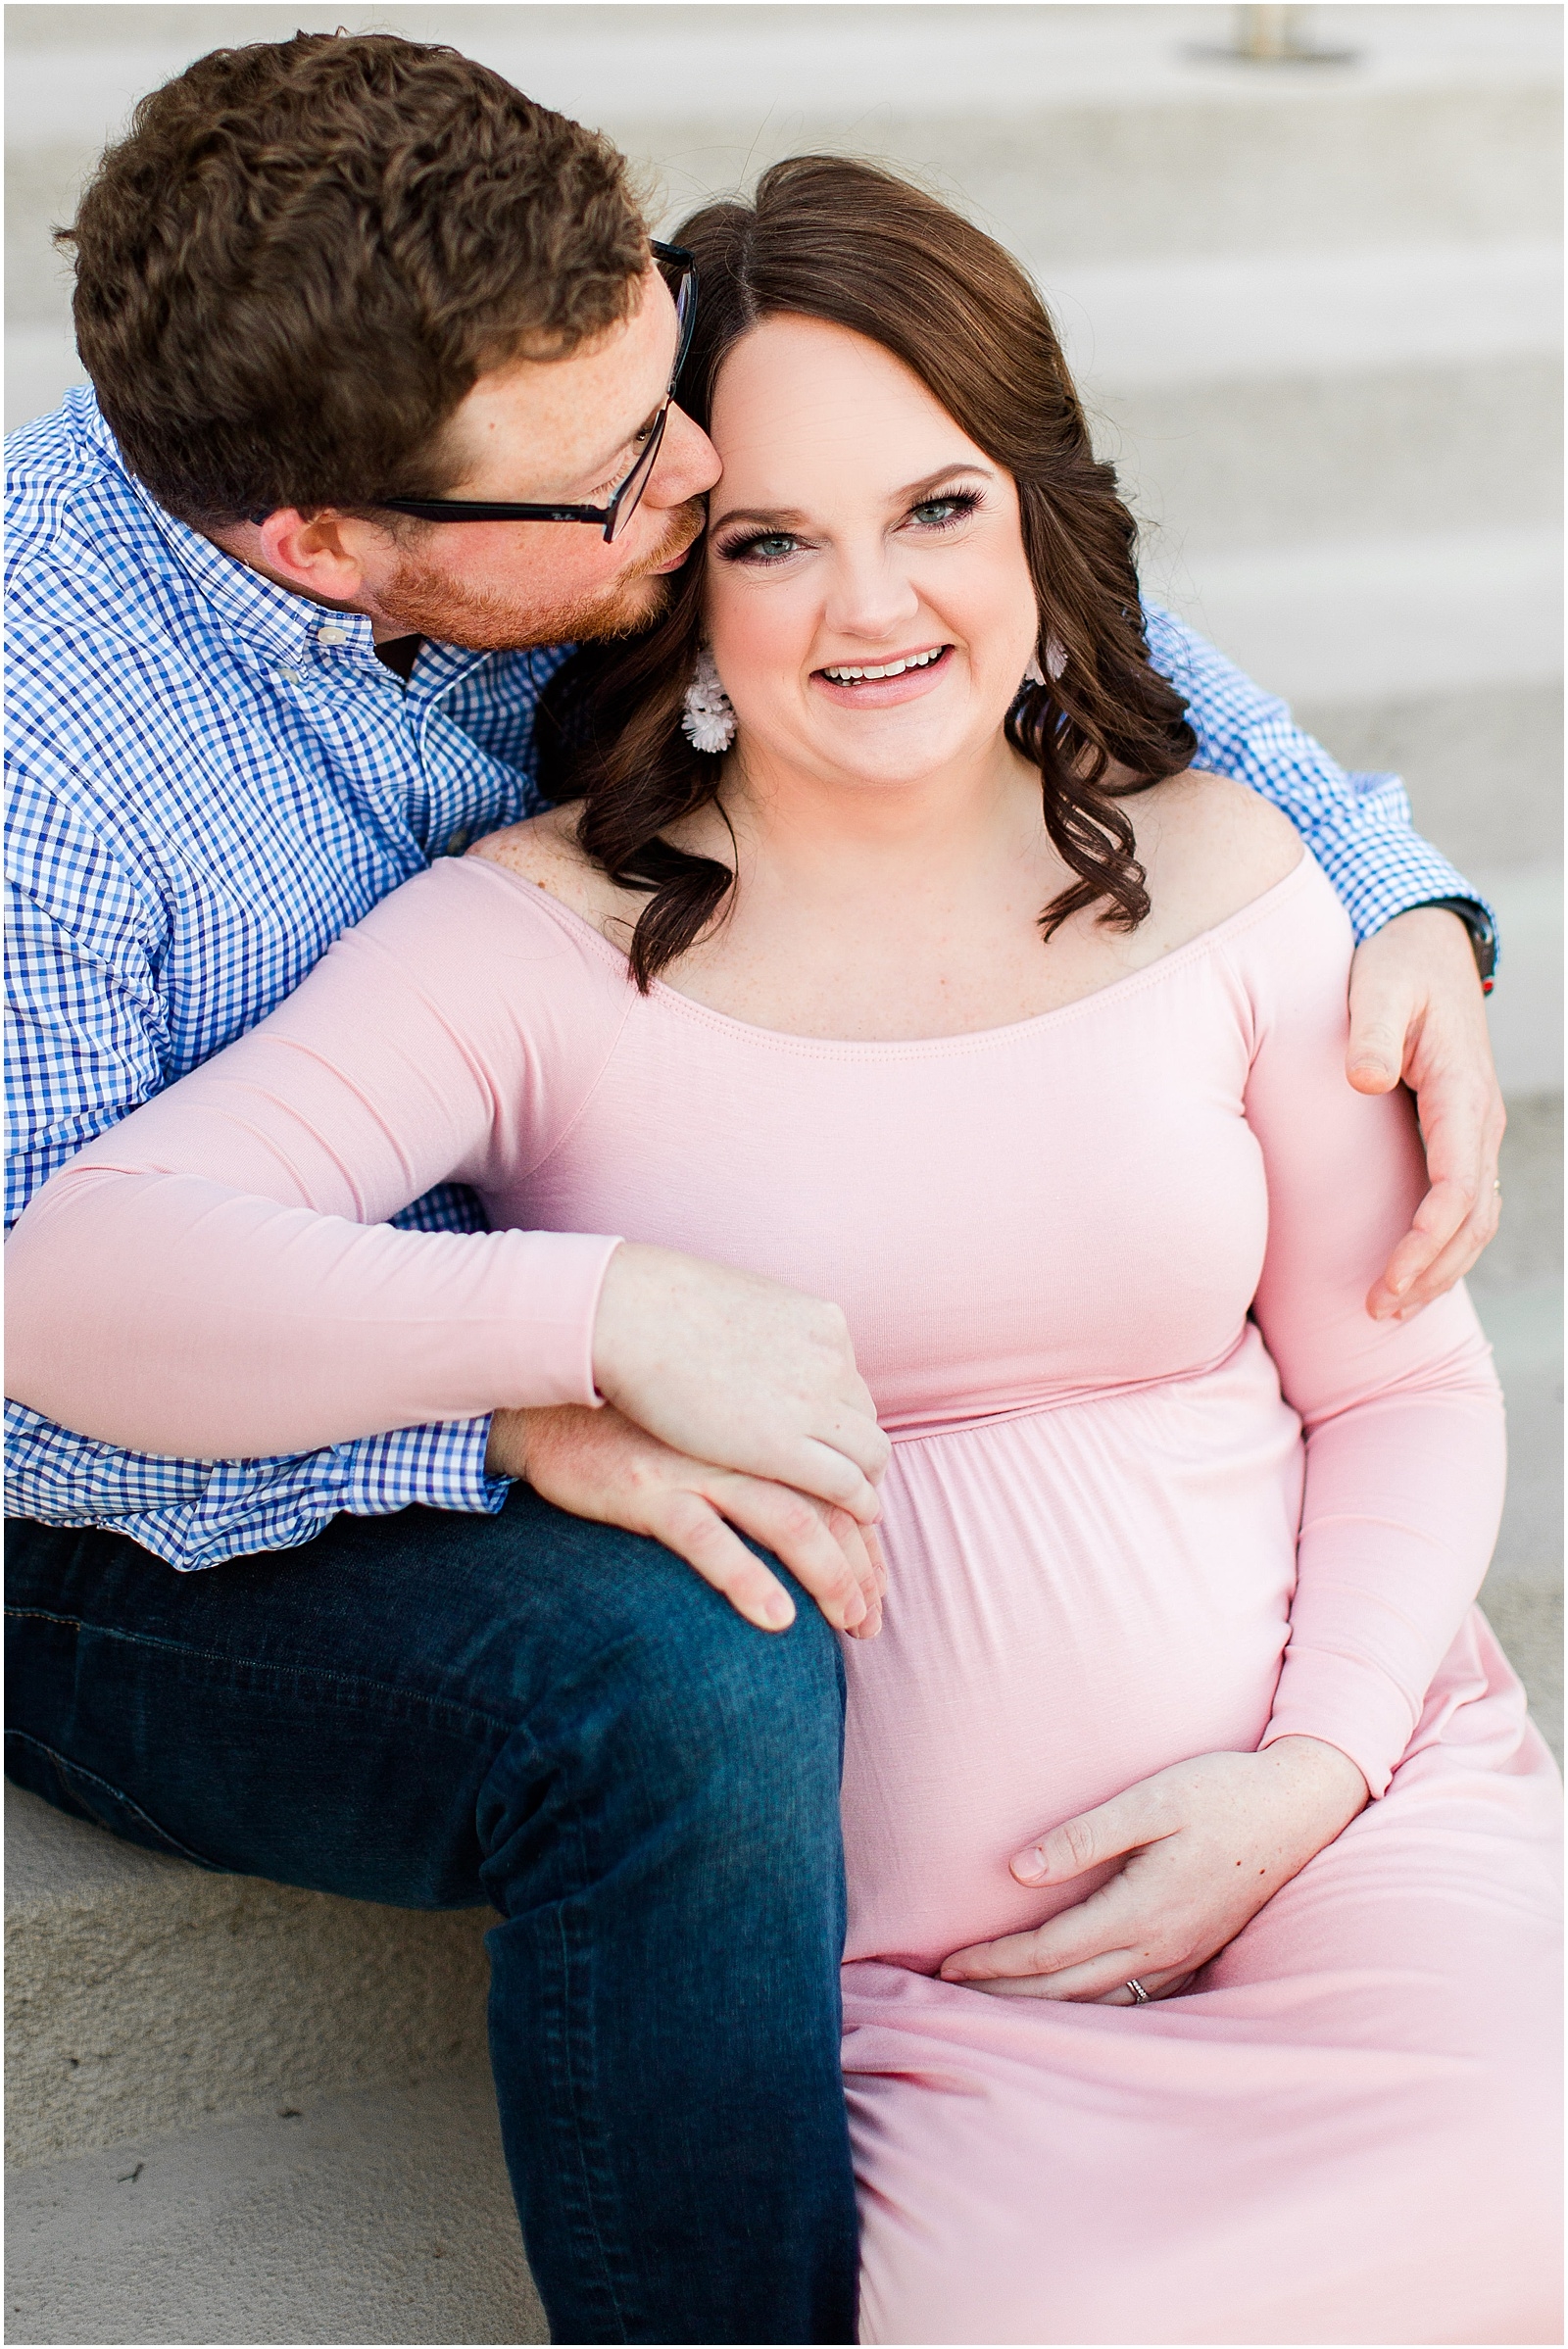 A Downtown Owensboro Maternity Session | Kayla and Grant Evansville Indiana Wedding Photographers-0020.jpg